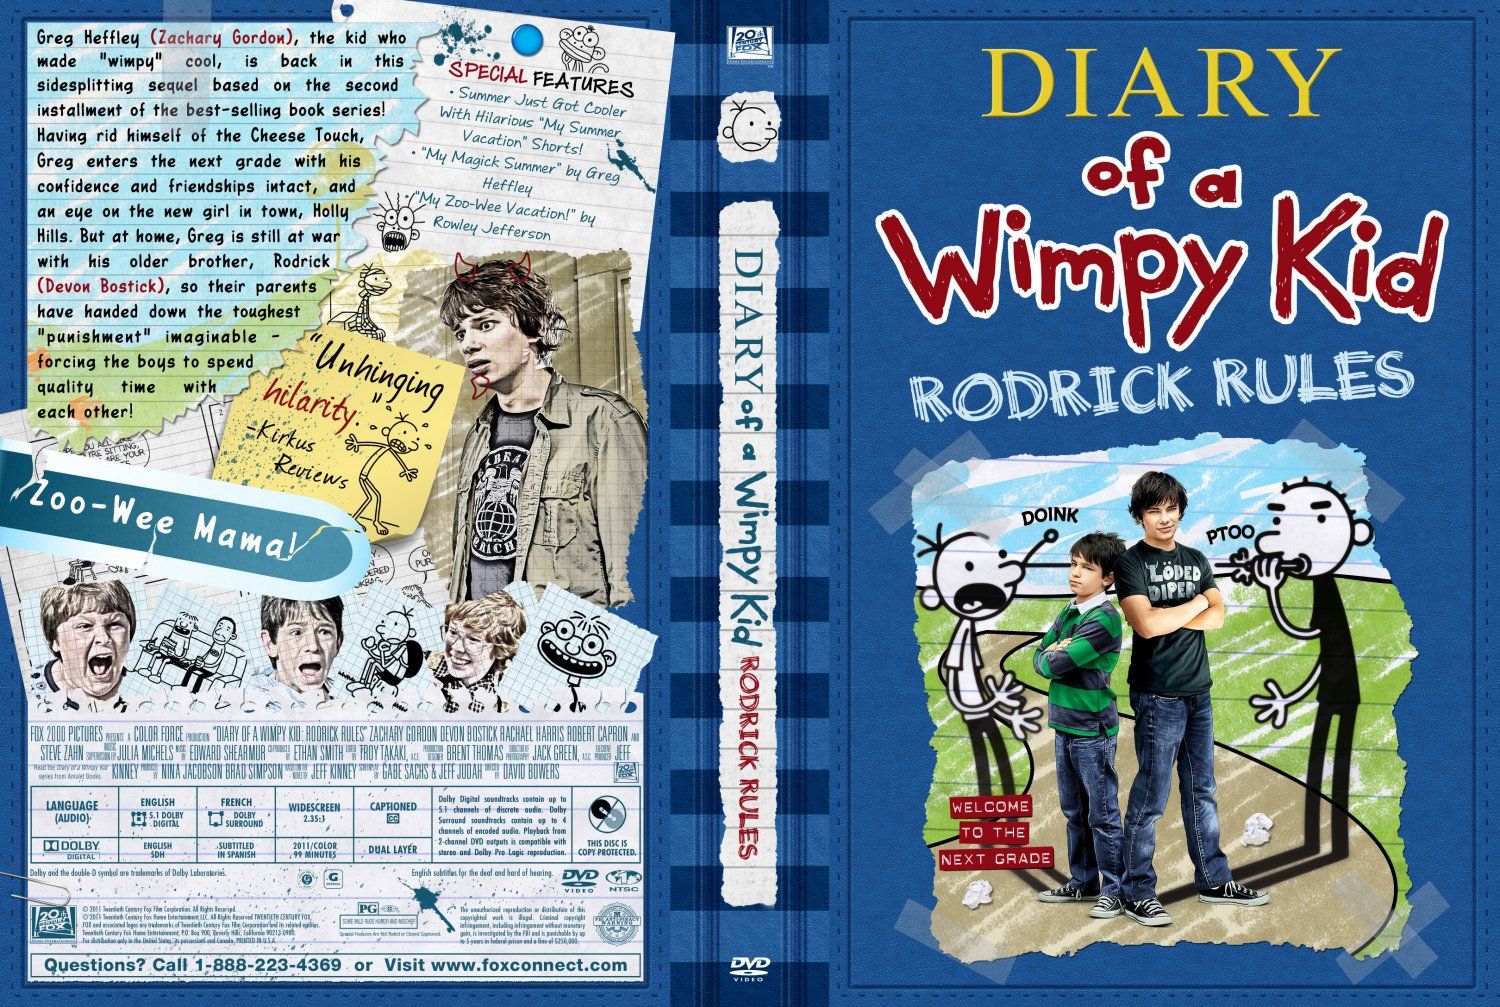 Diary Of A Wimpy Kid: Rodrick Rules wallpaper, Movie, HQ Diary Of